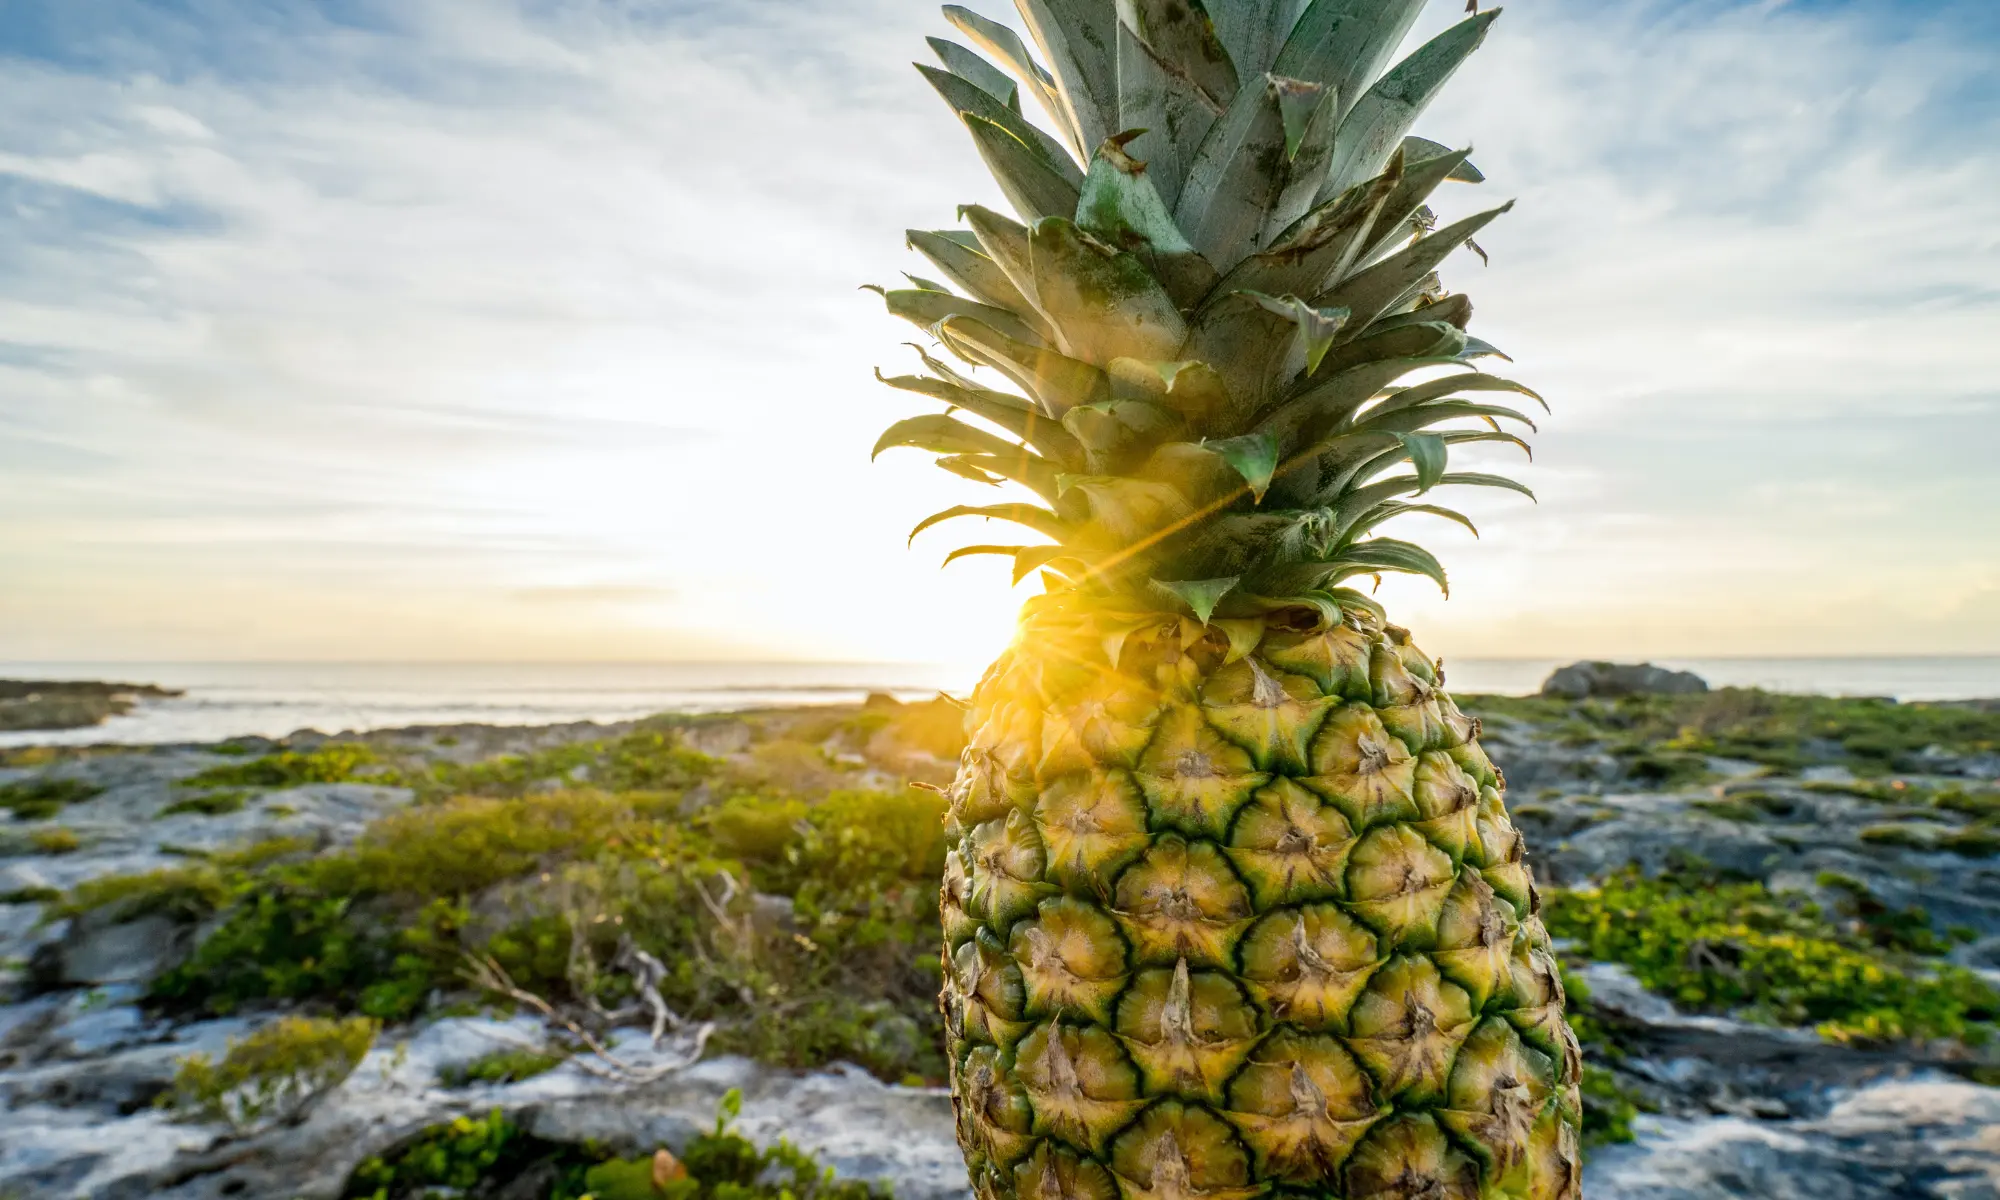 Pineapple As An Esoteric Symbol